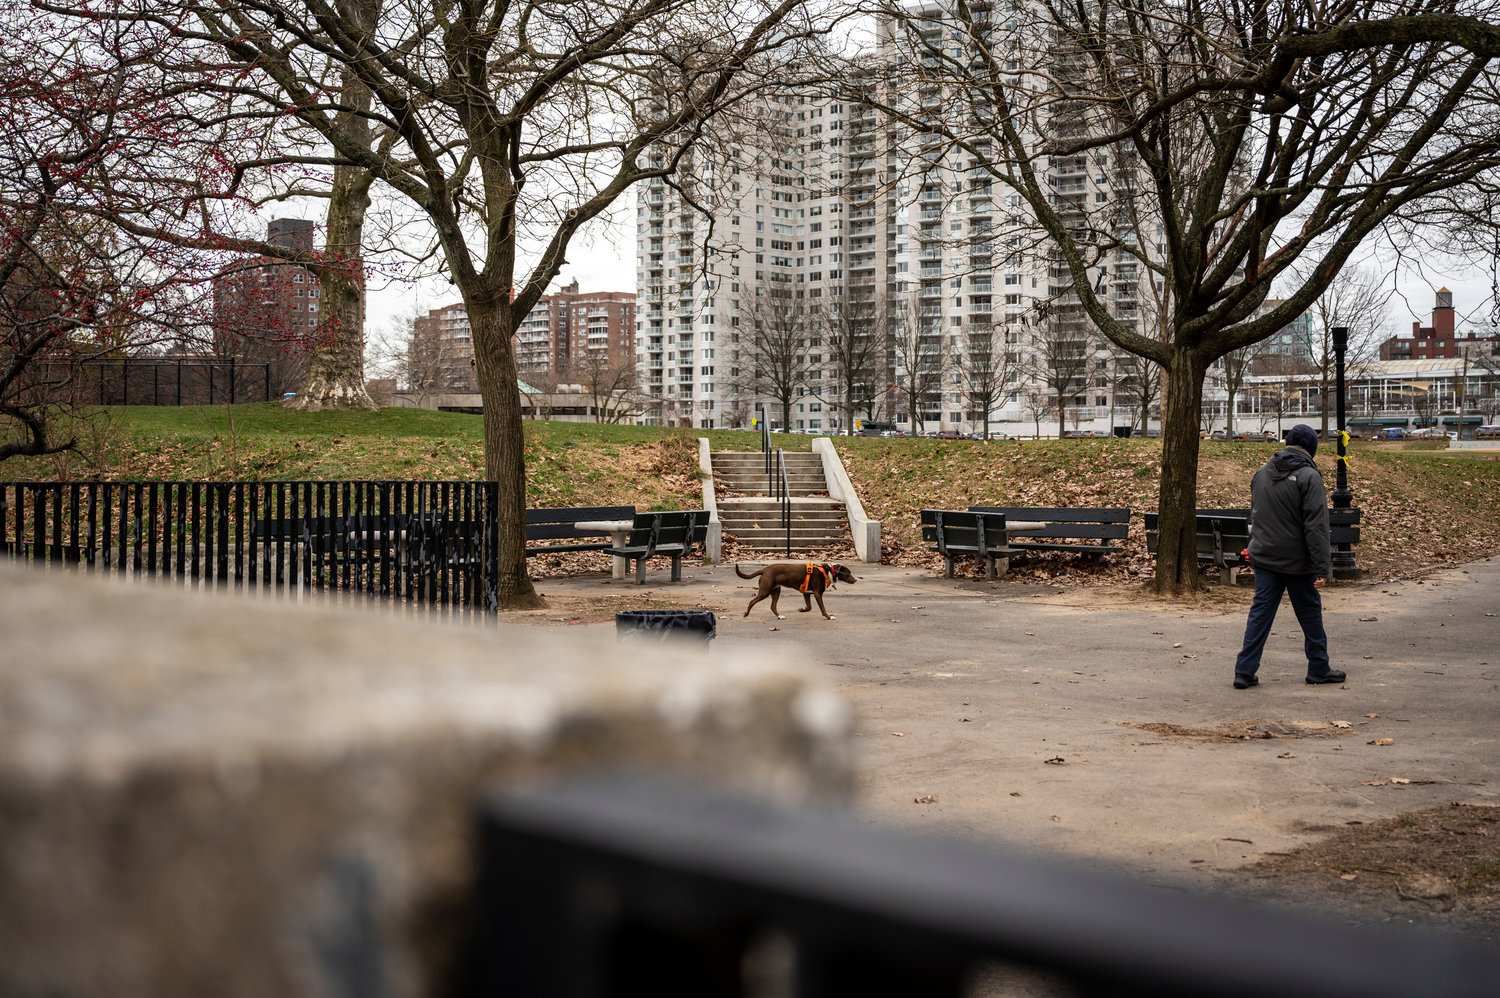 A man takes his dog for a walk through Seton Park on a chilly December morning. The park sits along Independence Avenue, which could become the site of several road design changes in the near future as part of an effort to discourage drag racing on the avenue.